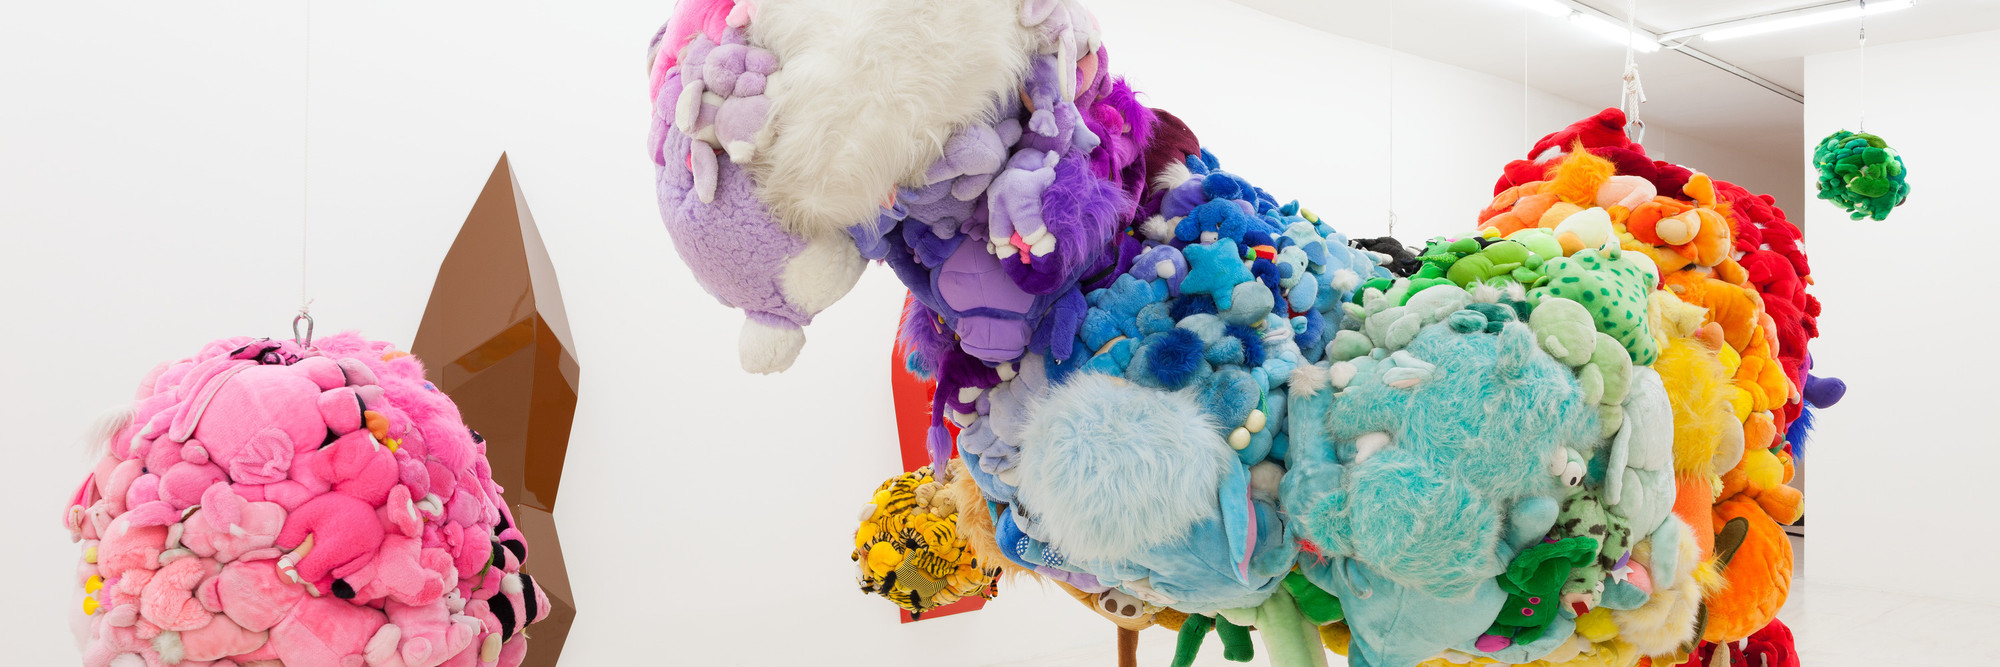 Mike Kelley. Deodorized Central Mass with Satellites. 1991/1999. Plush toys sewn over wood and wire frames with styrofoam packing material, nylon rope, pulleys, steel hardware and hanging plates, fiberglass, car paint, and disinfectant; overall dimensions variable. The Museum of Modern Art, New York. Partial gift of Peter M. Brant, courtesy the Brant Foundation, Inc. and gift of The Sidney and Harriet Janis Collection (by exchange), Mary Sisler Bequest (by exchange), Mr. and Mrs. Eli Wallach (by exchange), The Jill and Peter Kraus Endowed Fund for Contemporary Acquisitions, Anne and Joel Ehrenkranz, Mimi Haas, Ninah and Michael Lynne, and Maja Oeri and Hans Bodenmann